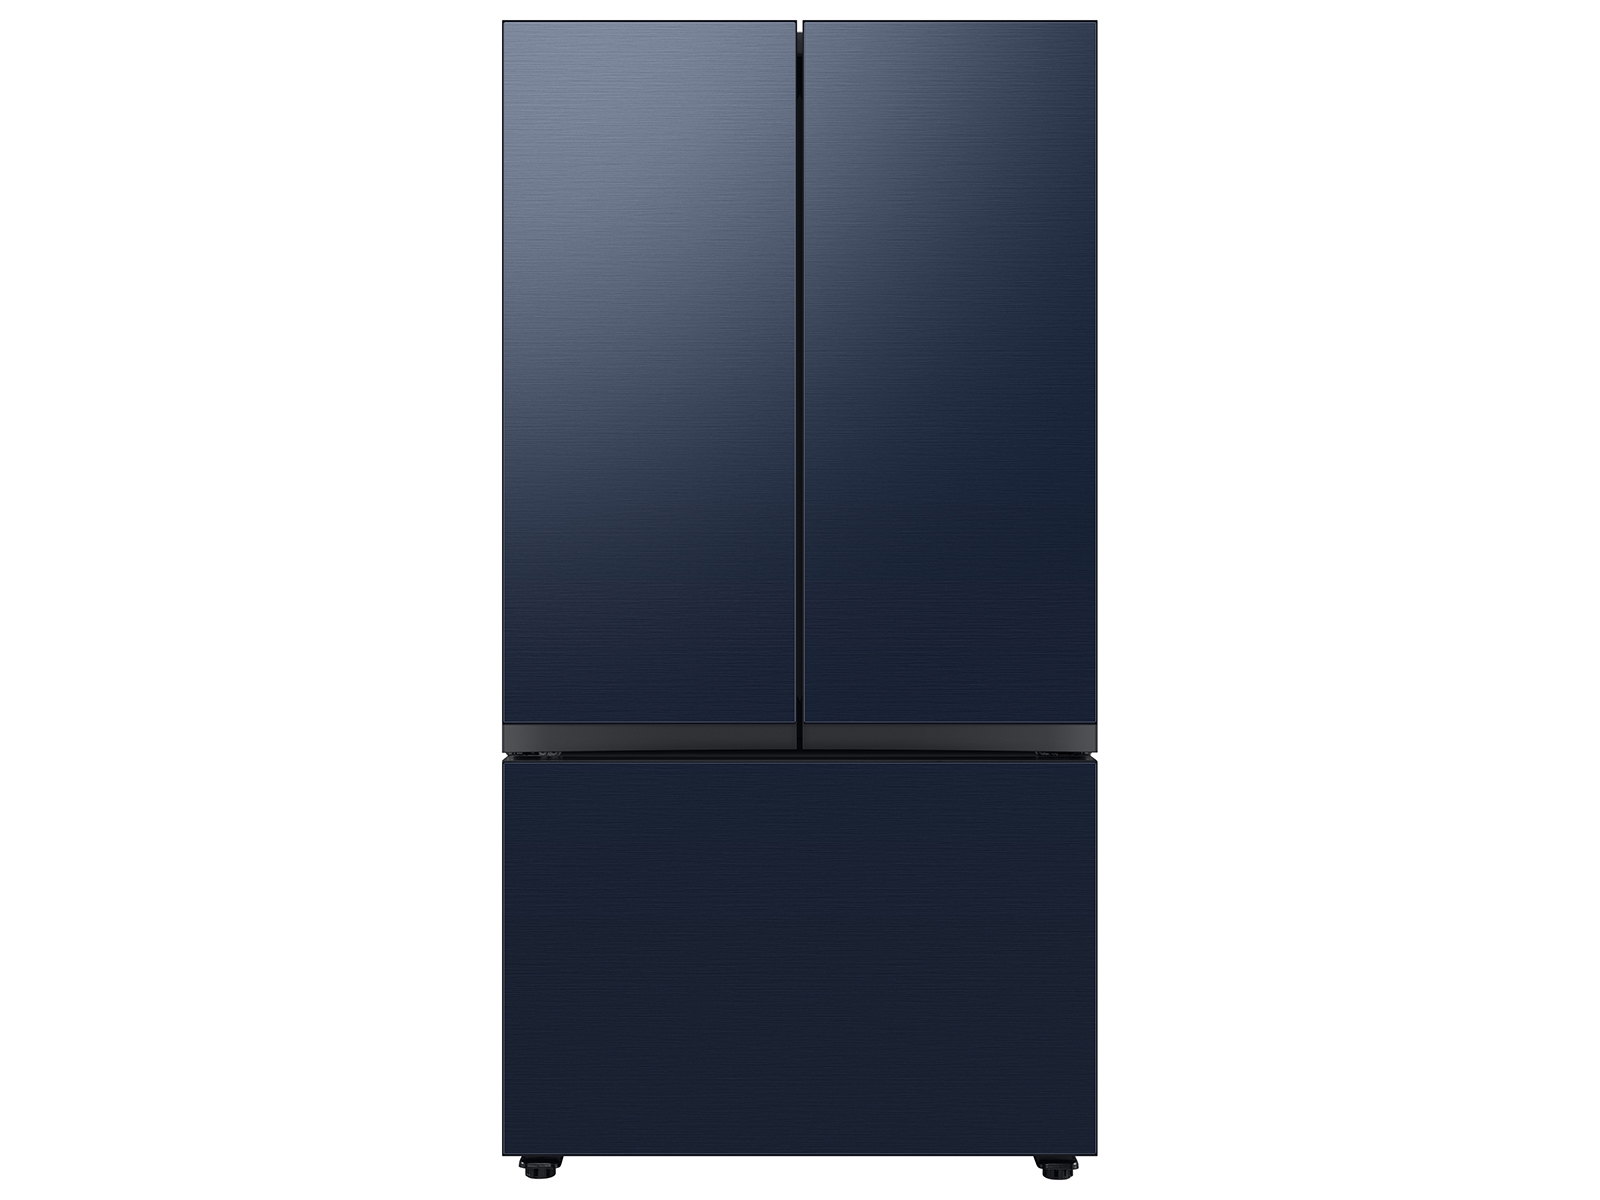 RF30BB69006MAA by Samsung - Bespoke 3-Door French Door Refrigerator (30 cu.  ft.) - with Top Left and Family Hub™ Panel in White Glass - and Matte Grey  Glass Bottom Door Panel